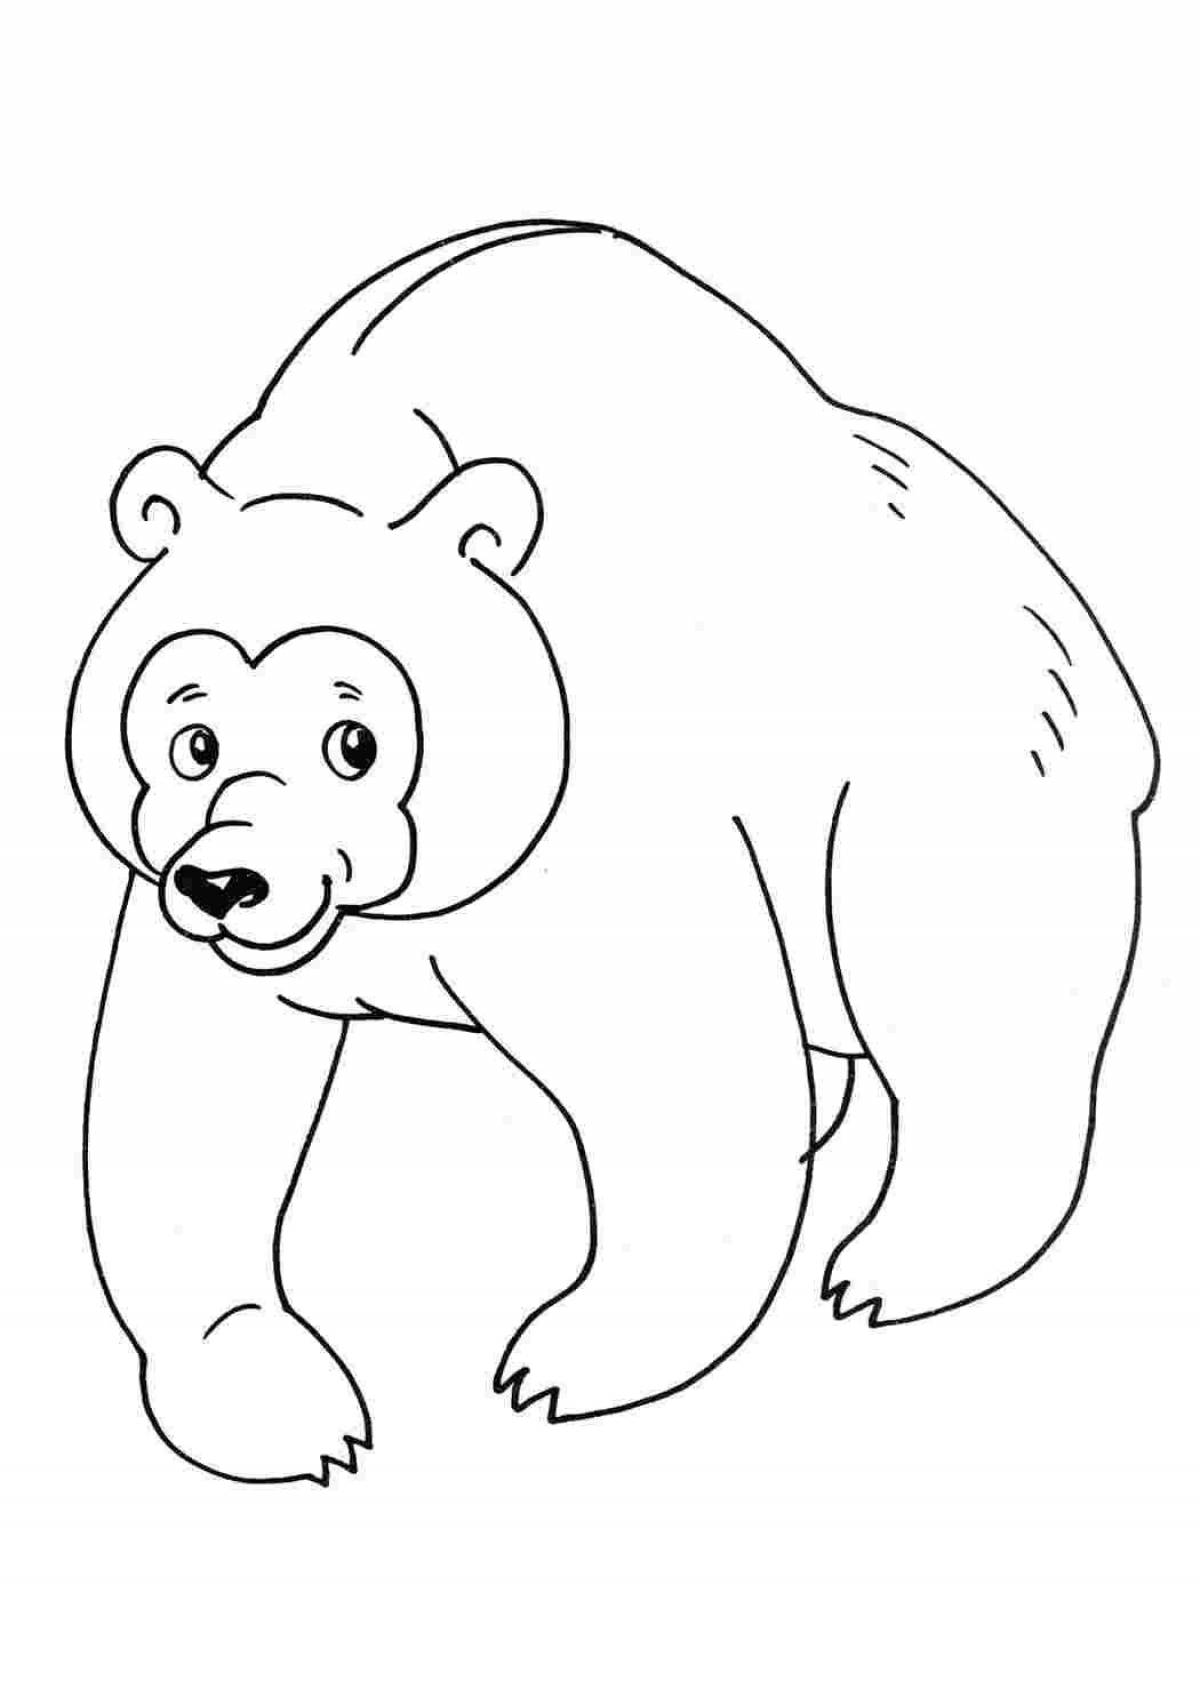 Bear for children 5 6 years old #1